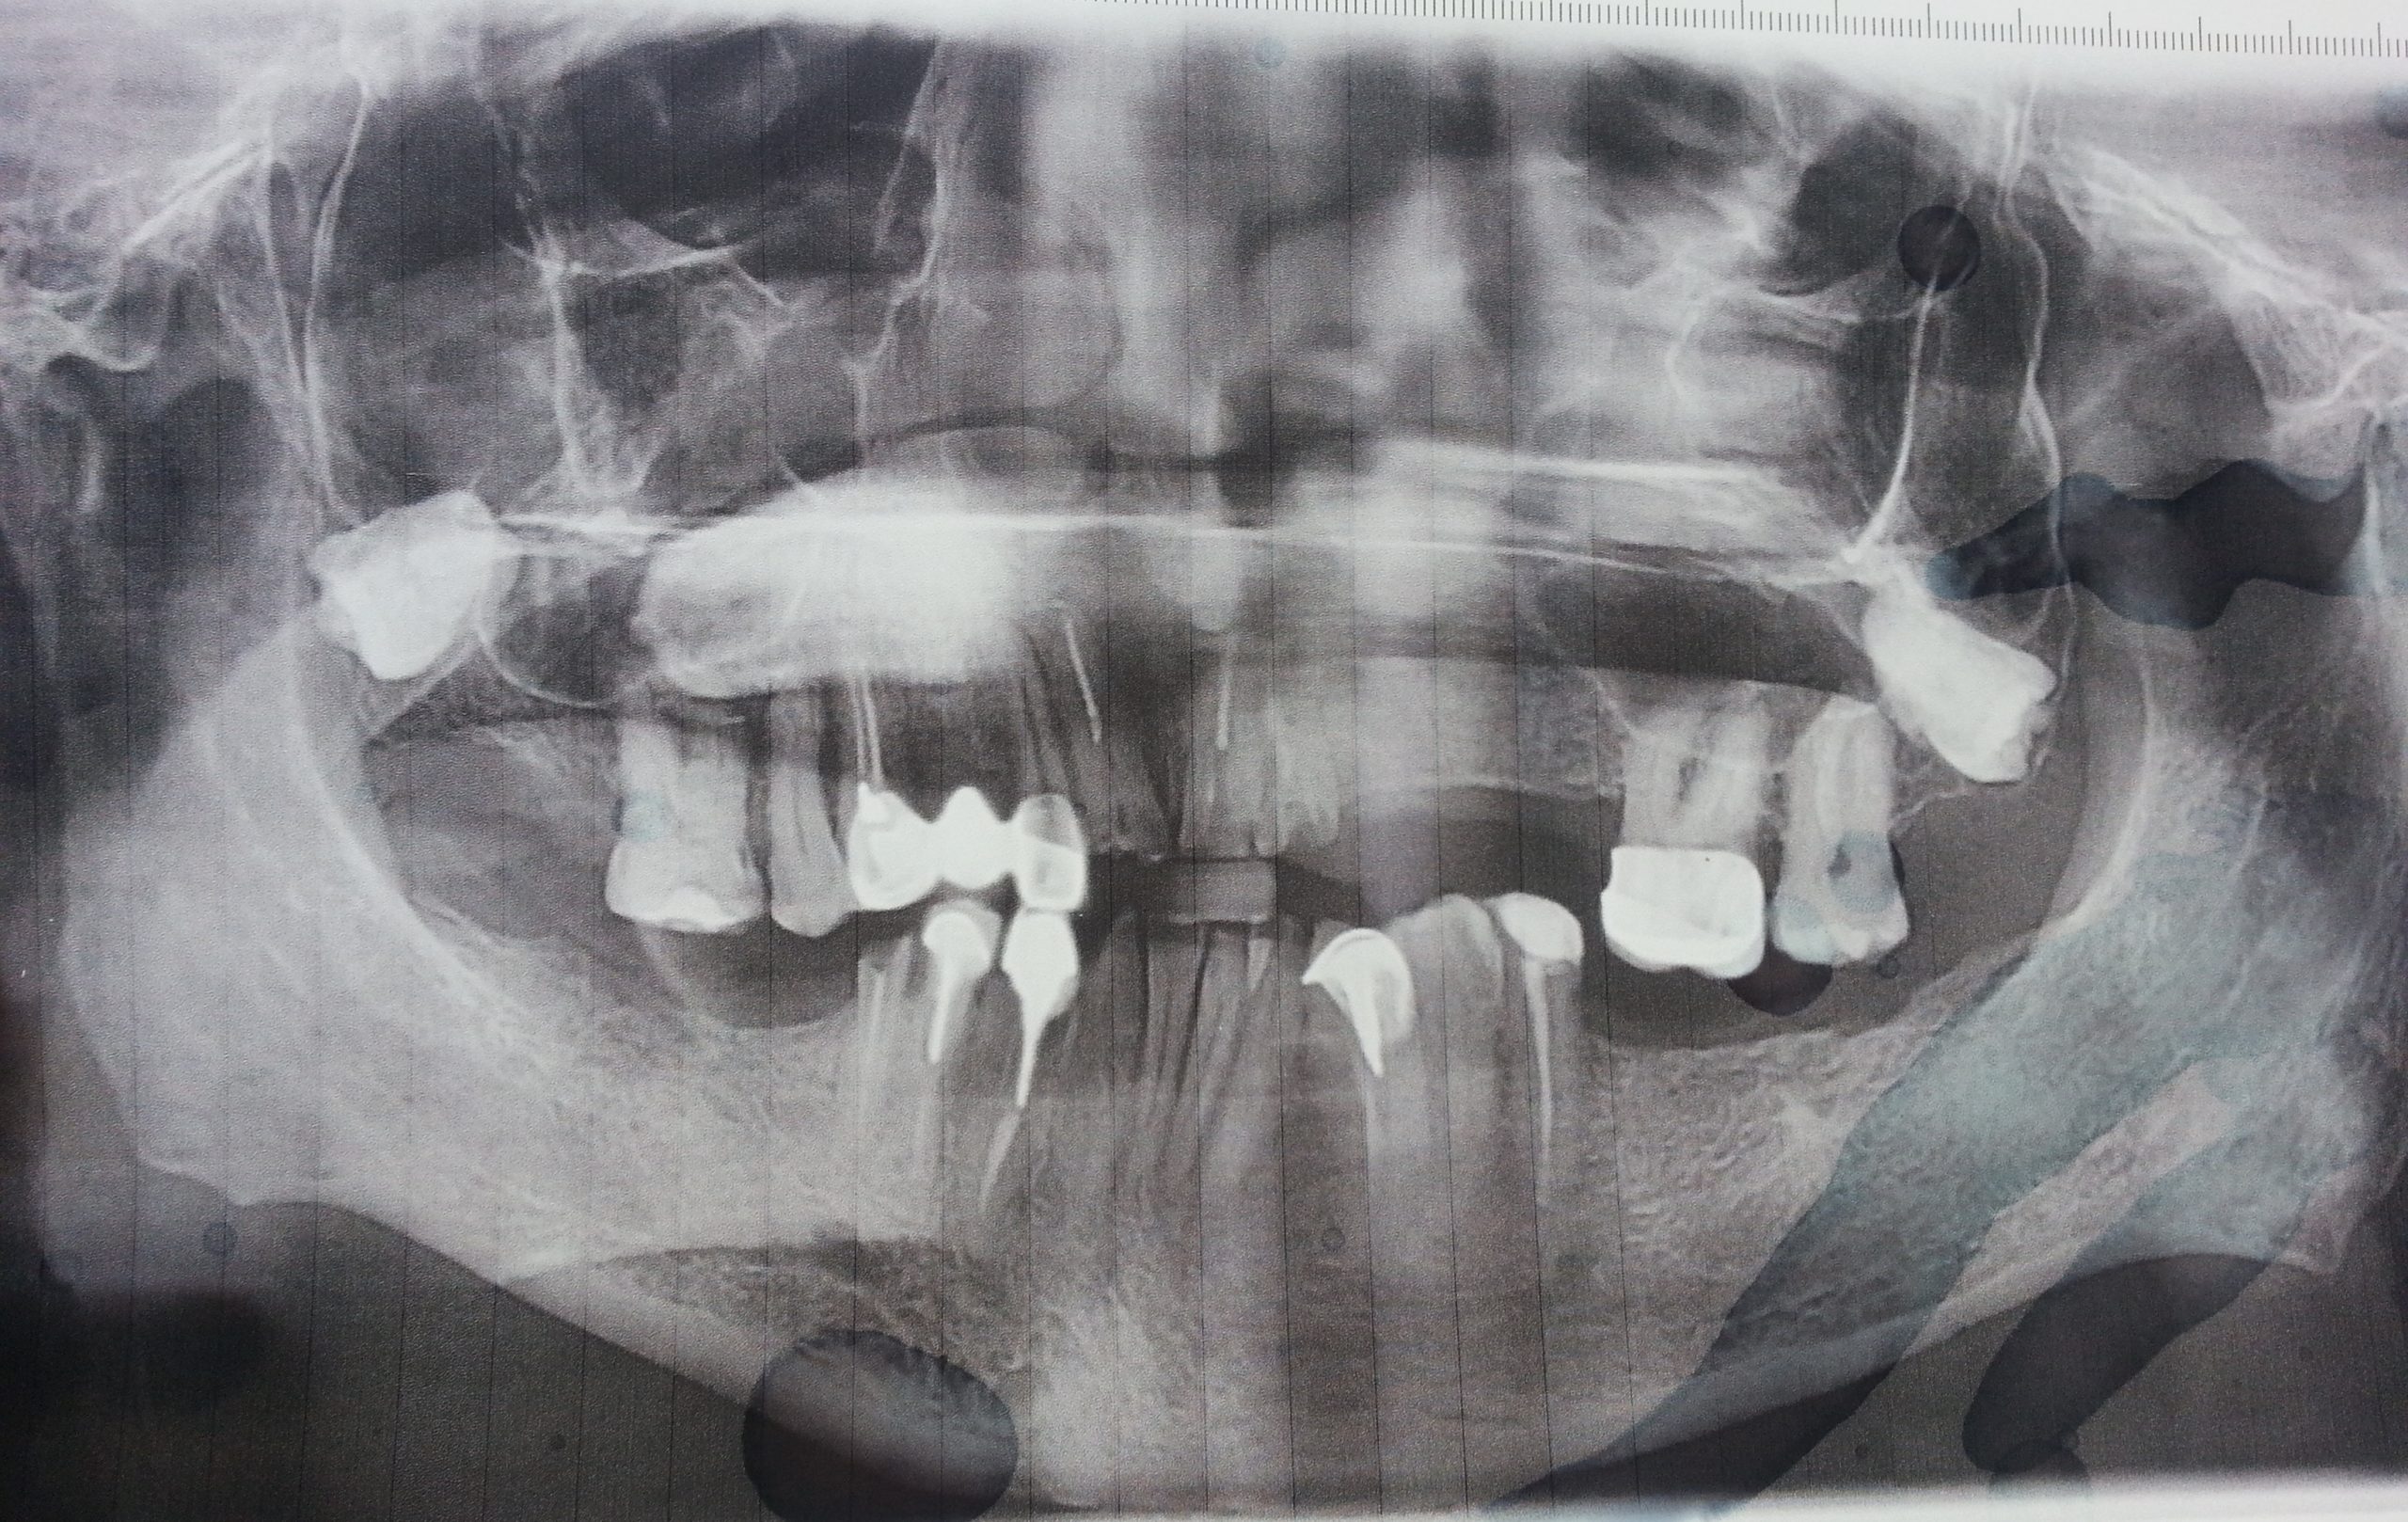 http://dentalexcellence.co.in/wp-content/uploads/2023/02/Pt-2-Pre-Implant-Xray-scaled.jpg